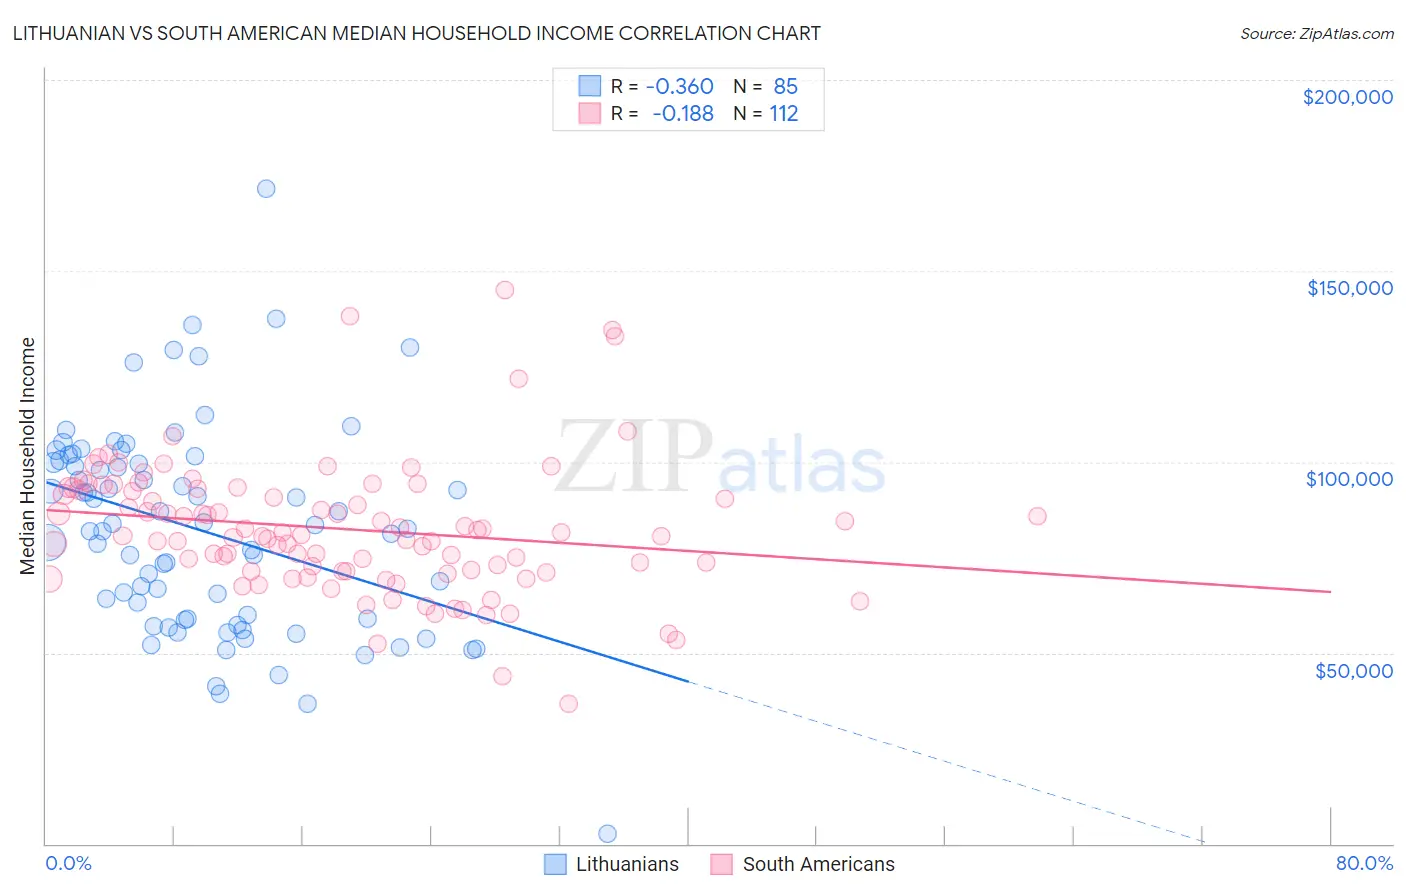 Lithuanian vs South American Median Household Income